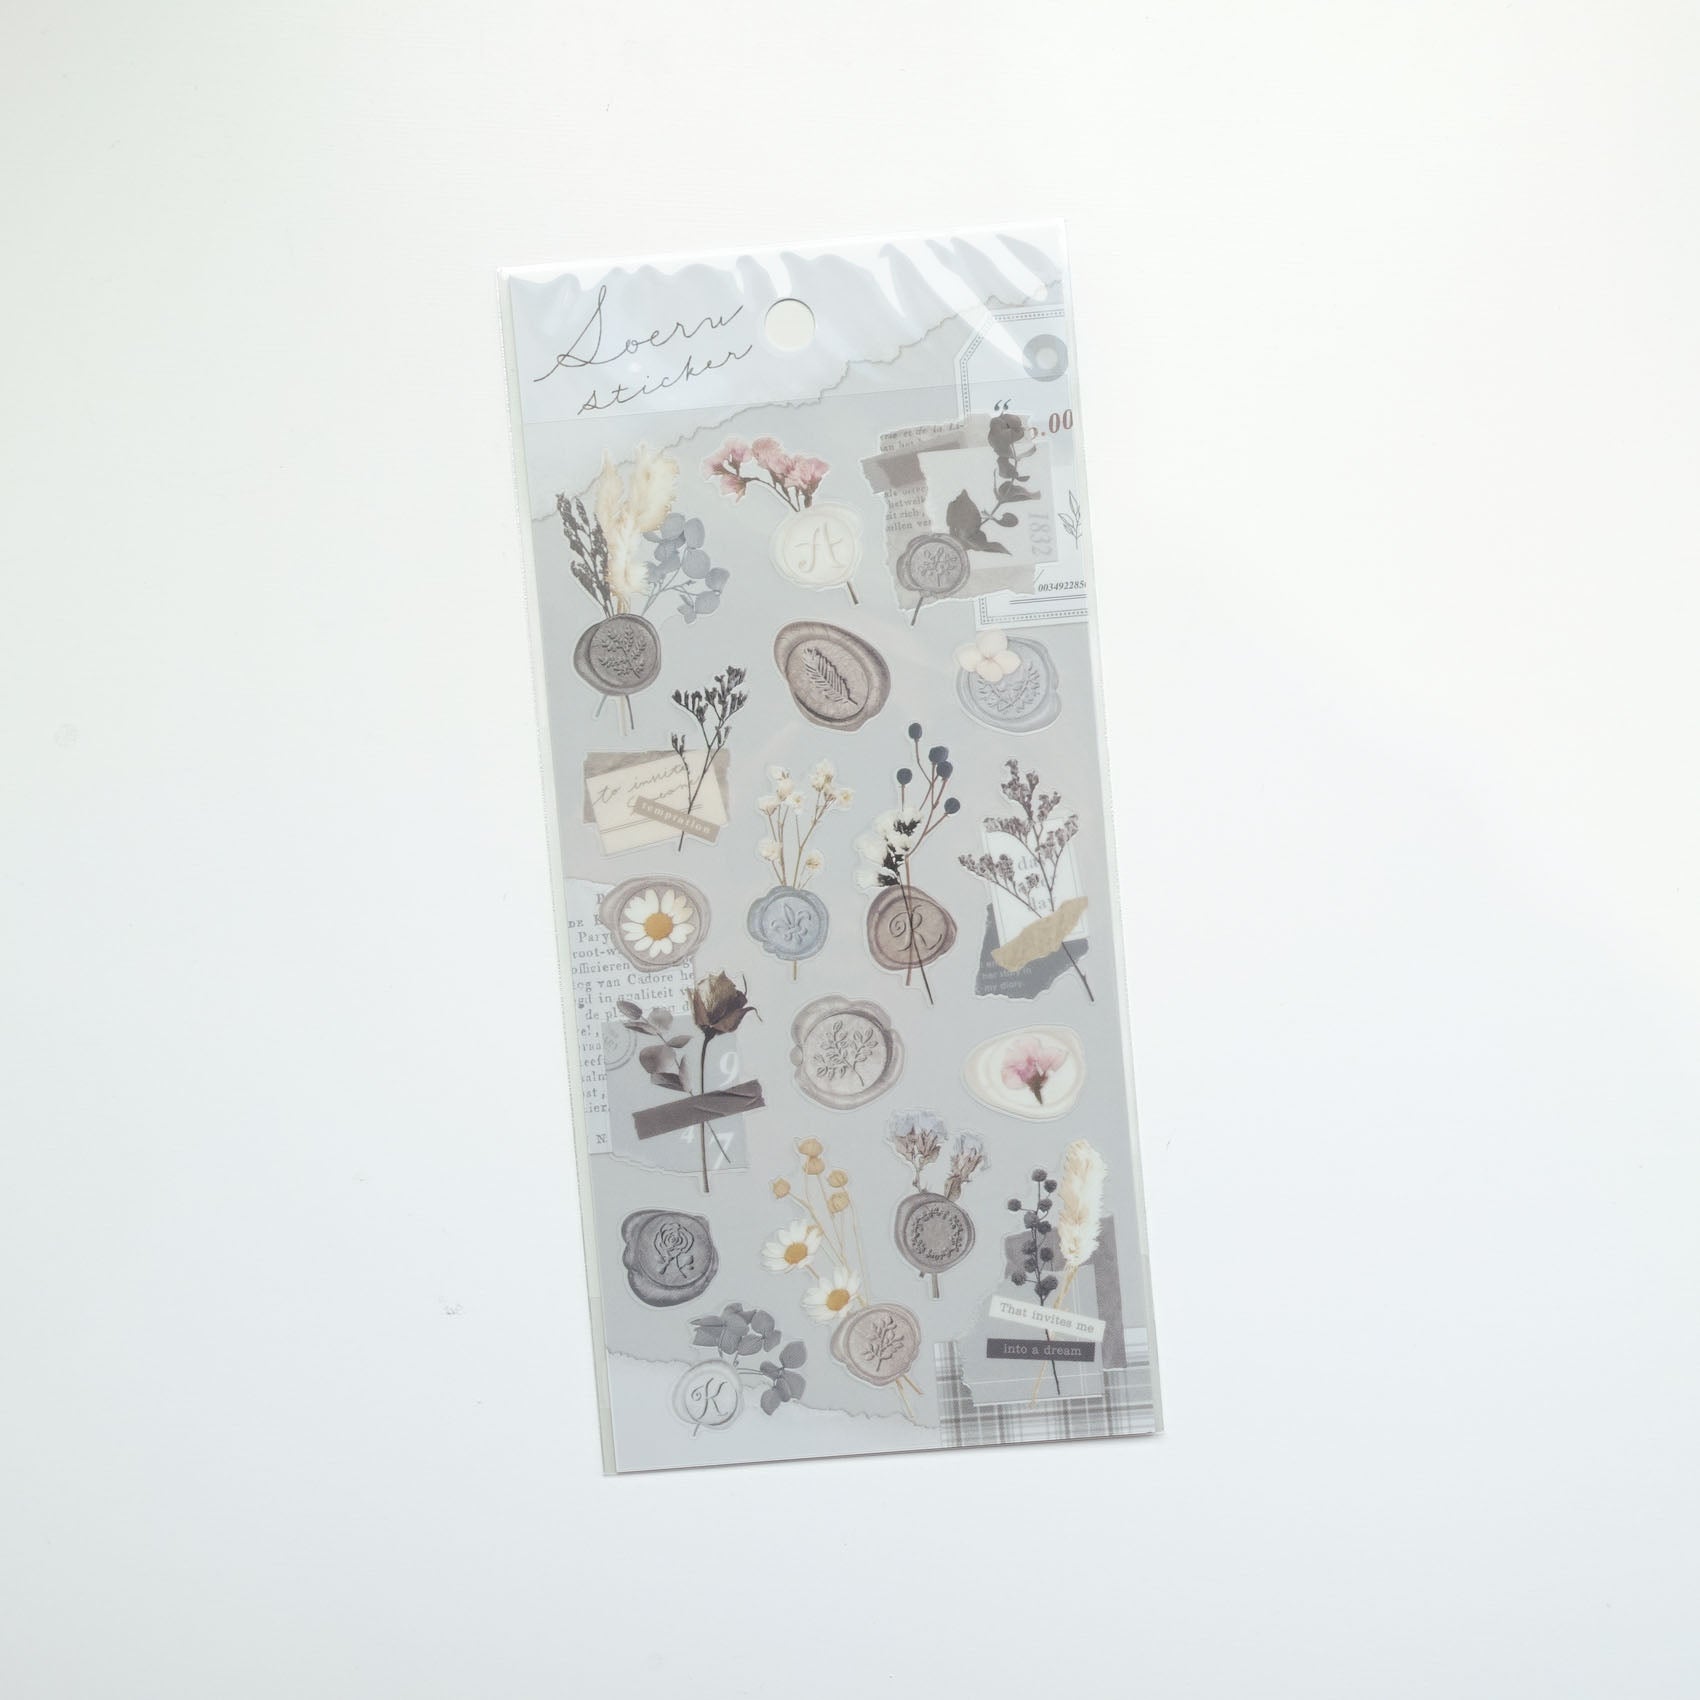 Soeru Sticker Sheet with Floral Wax Seal Pictures - Gray